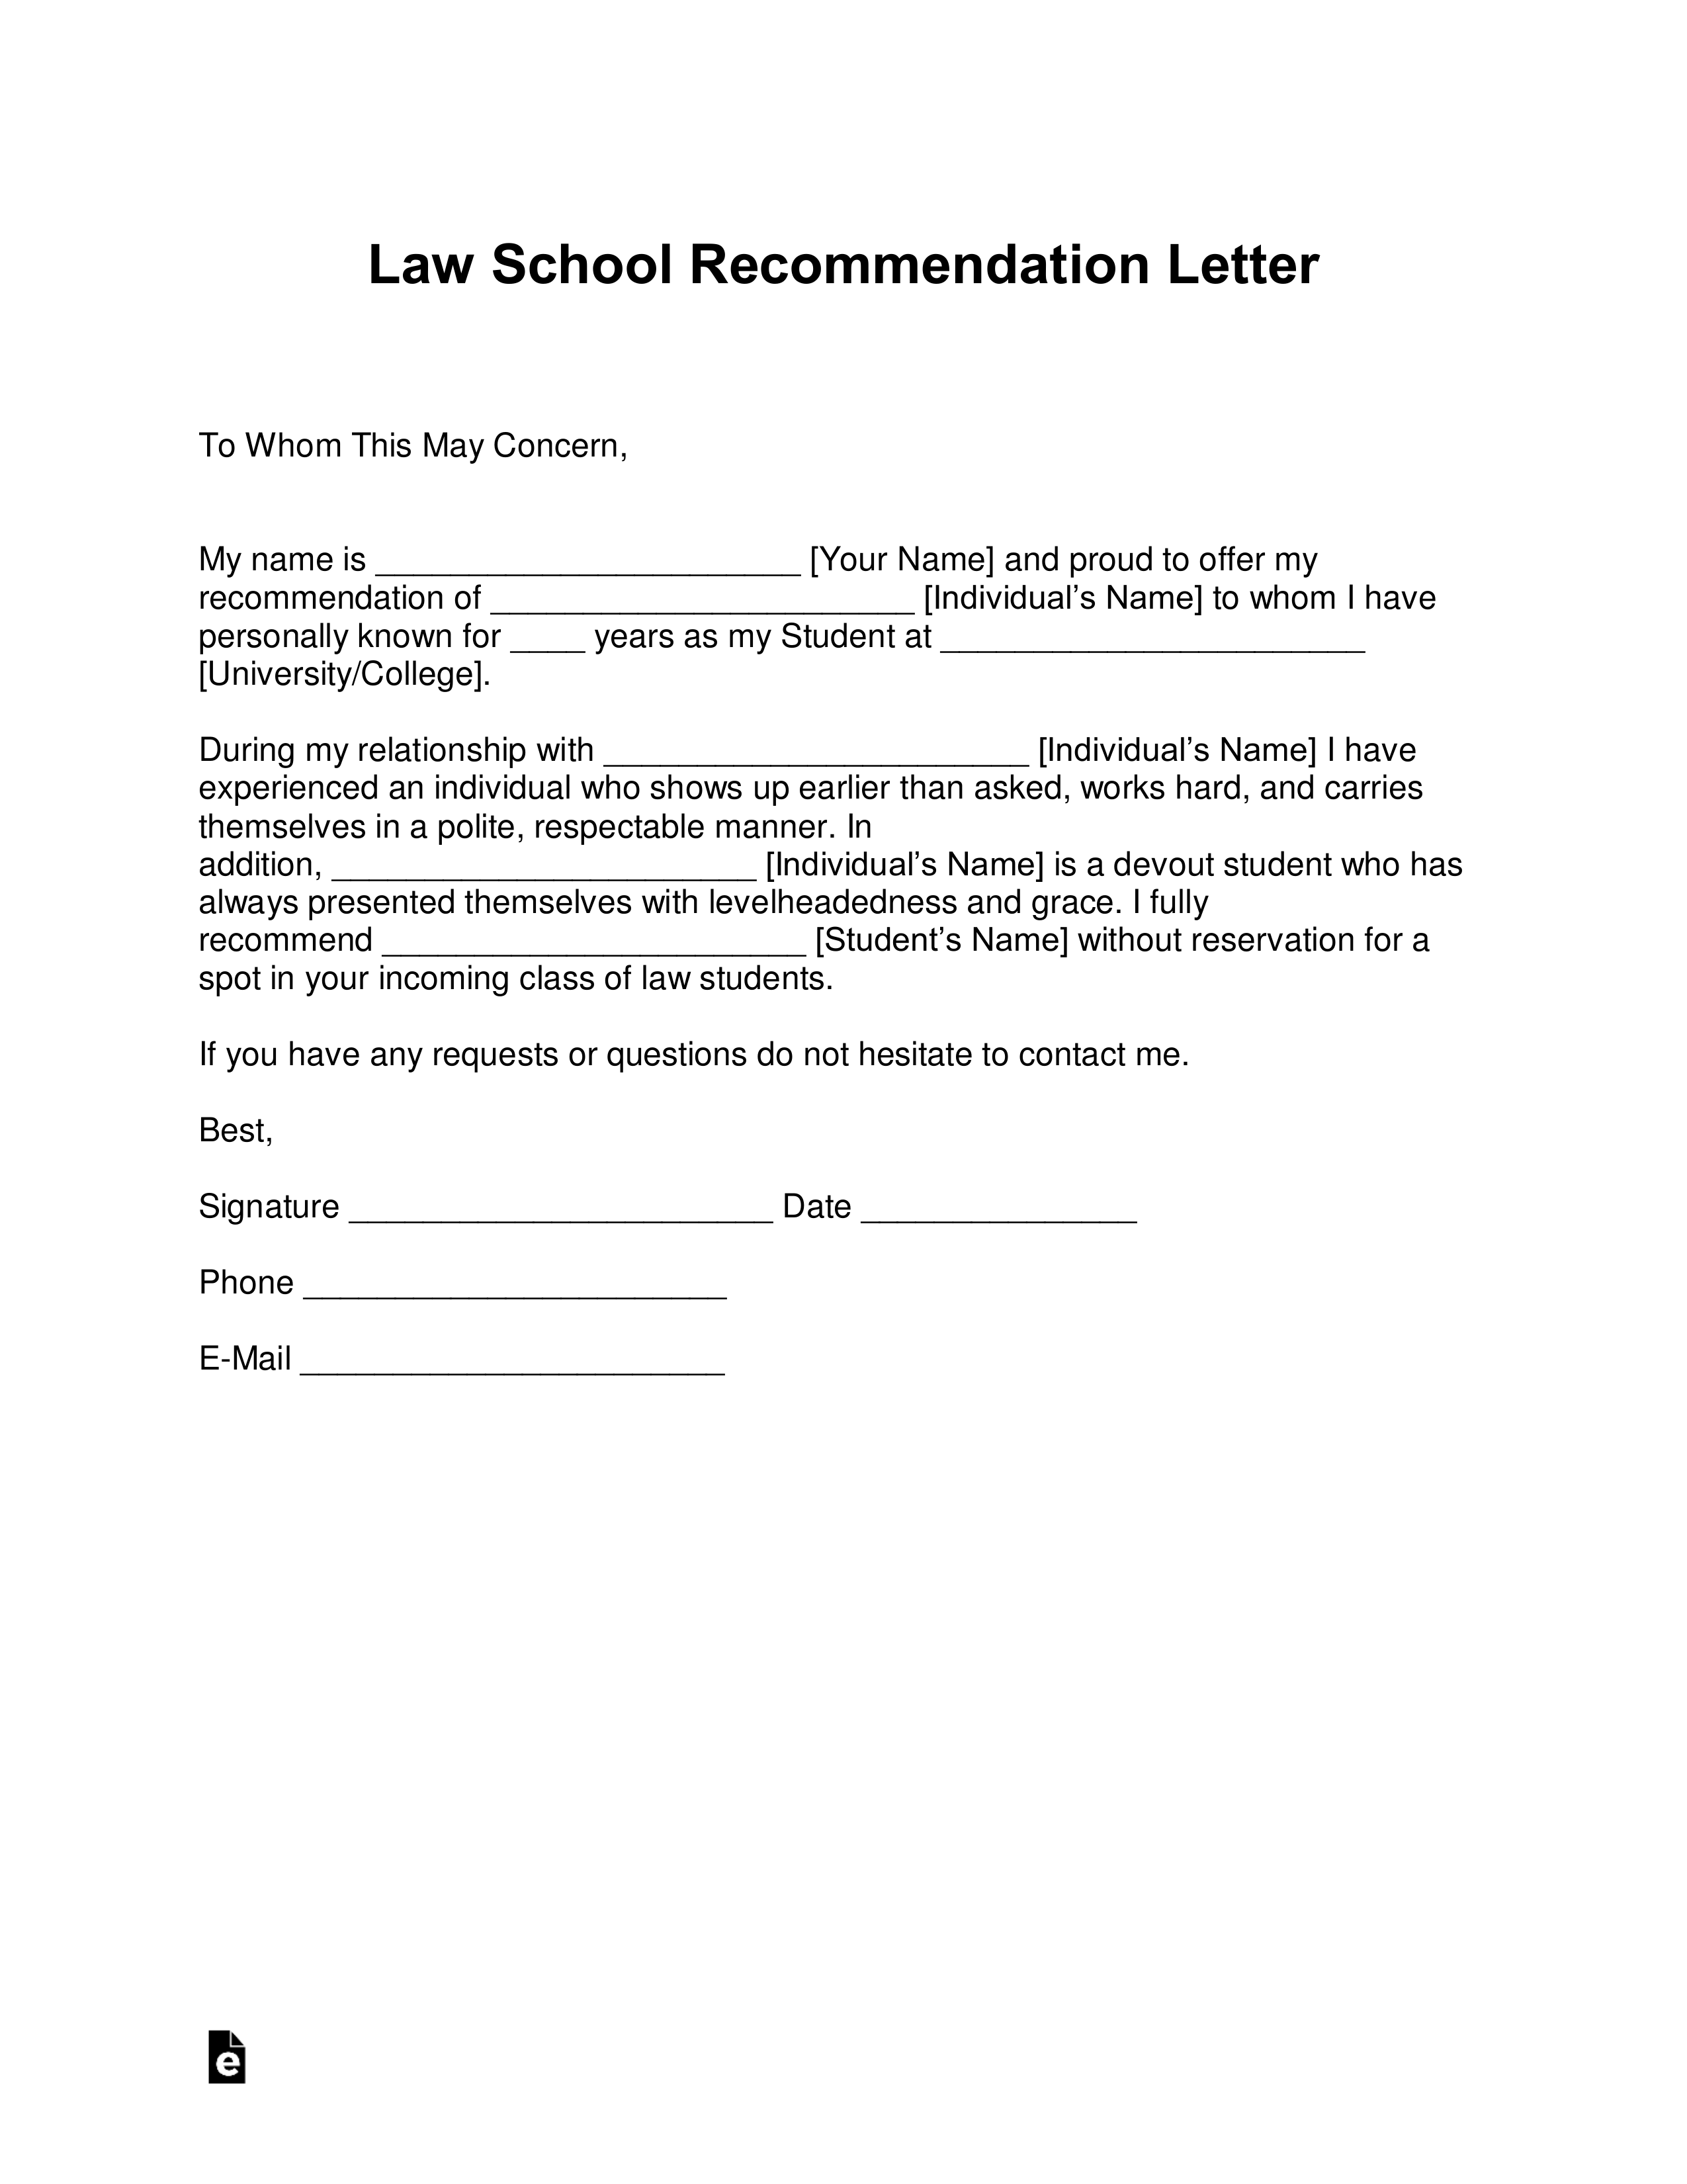 Recommendation Letter For Student Going To College from eforms.com